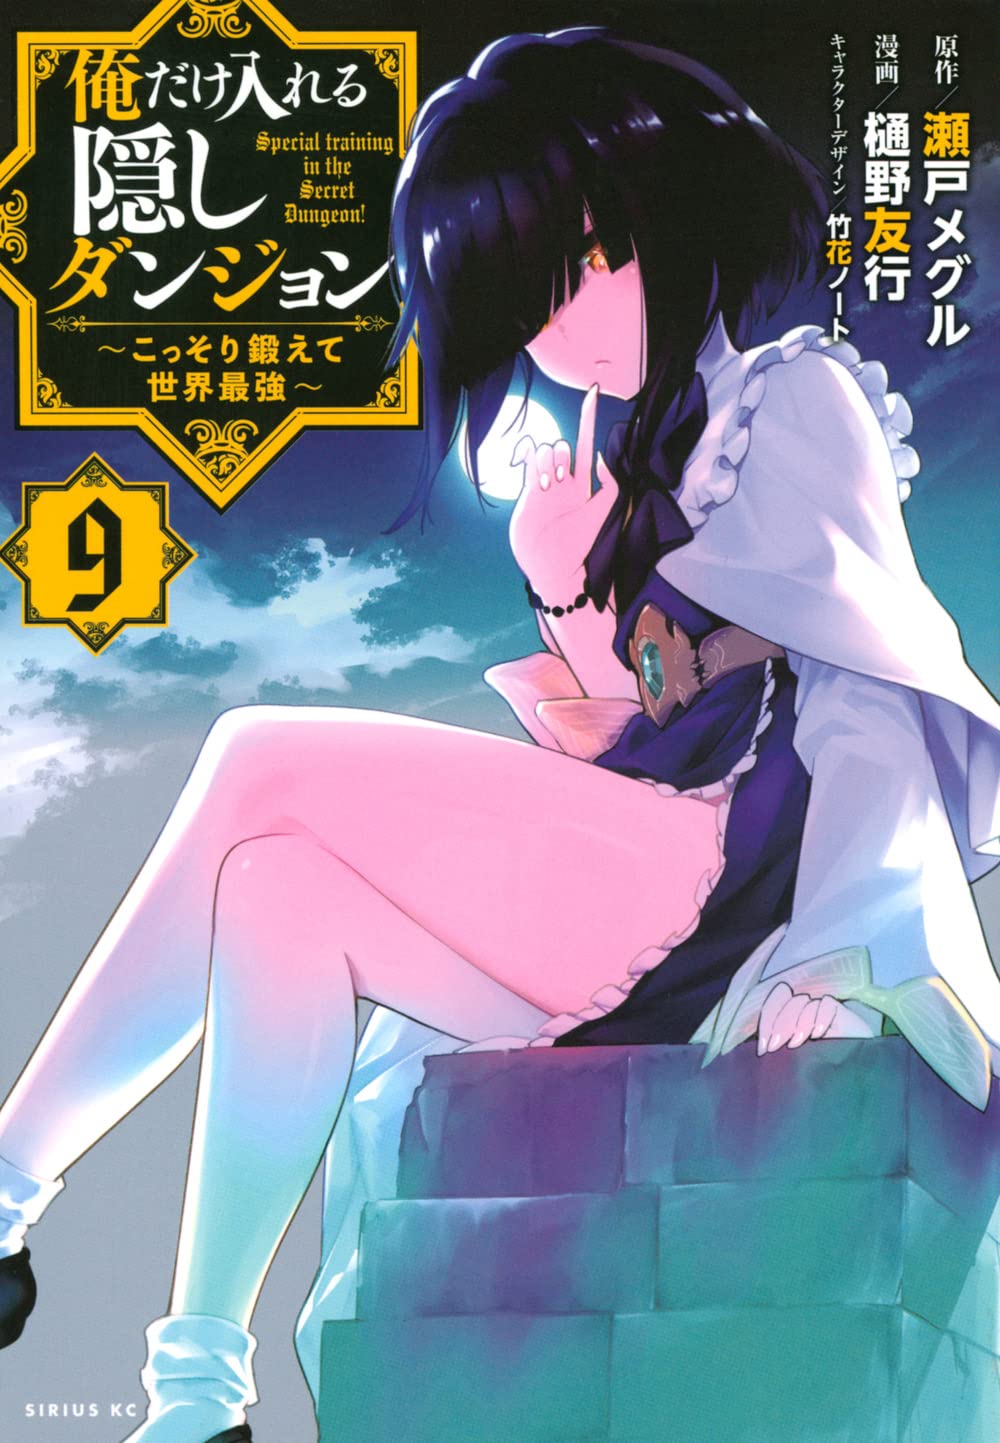 The Hidden Dungeon Only I Can Enter (Ore dake Haireru Kakushi Dungeon) 9 –  Japanese Book Store